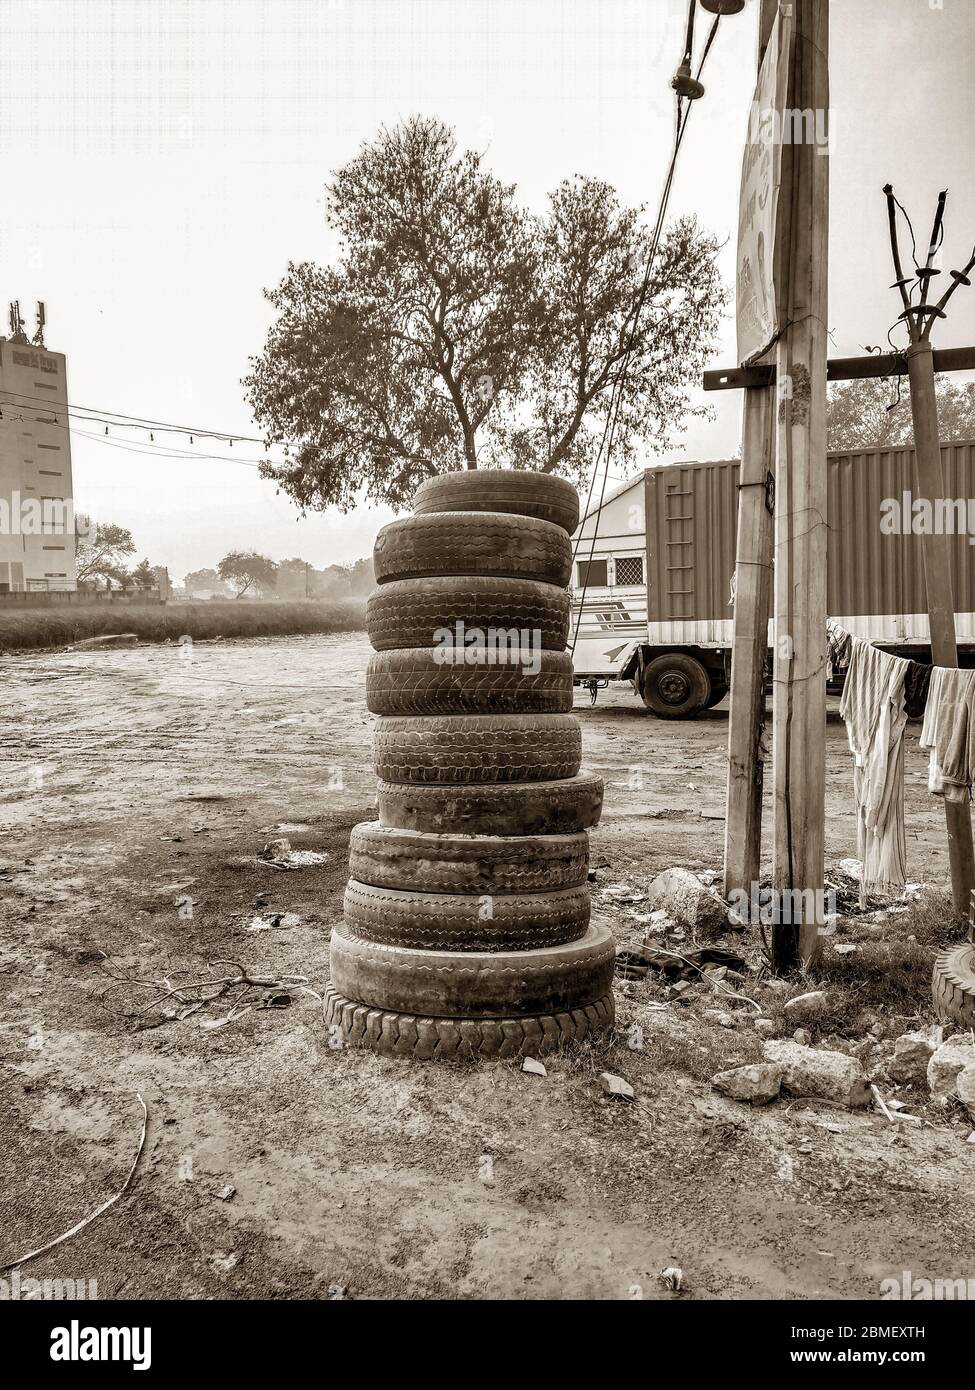 Stacked tyre at road side tyre change or service shop Stock Photo